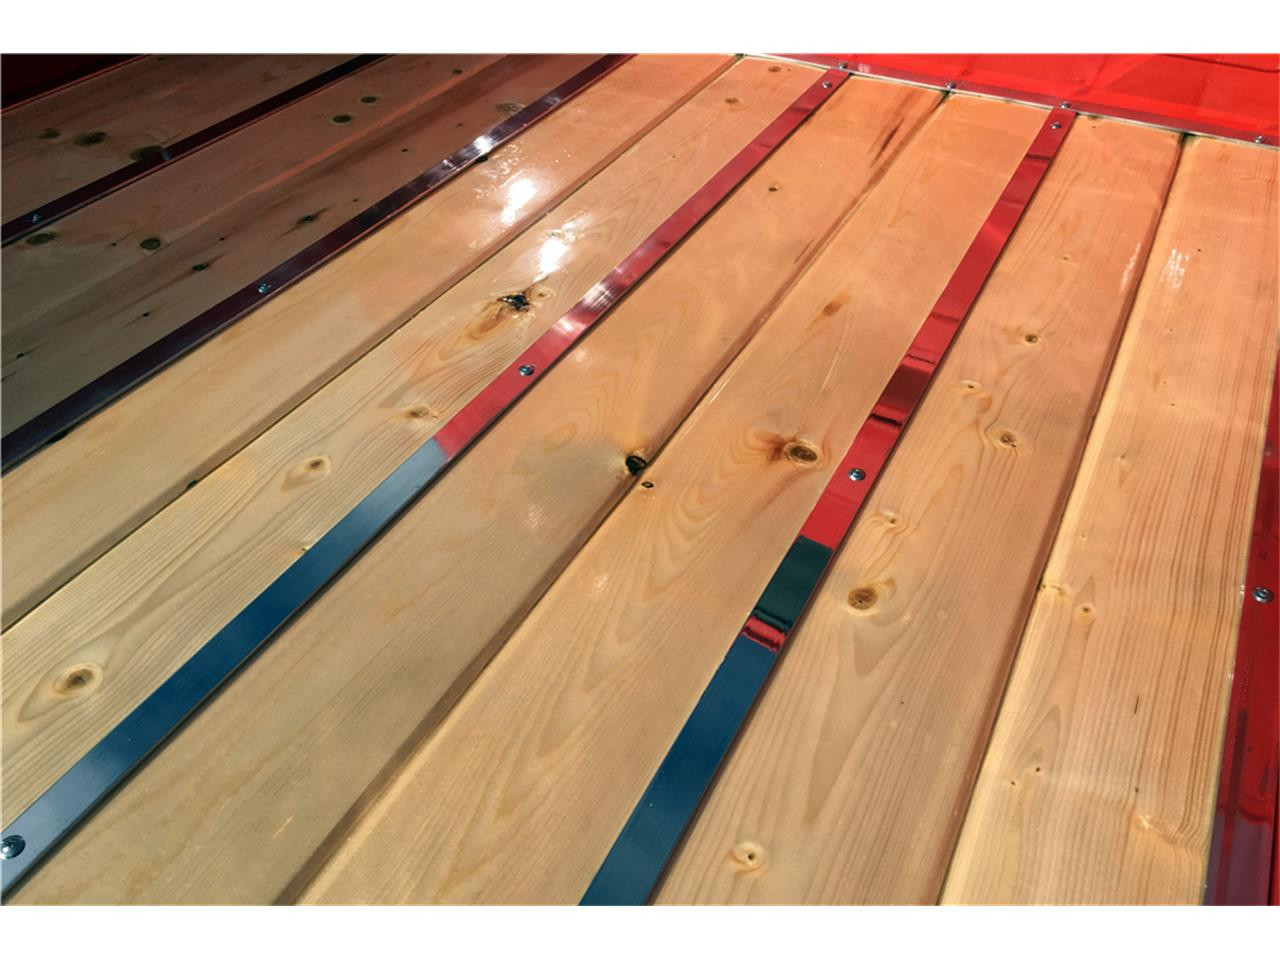 14 Spectacular Arizona Hardwood Flooring Scottsdale 2022 free download arizona hardwood flooring scottsdale of 1956 chevrolet 3100 for sale classiccars com cc 1051673 throughout large picture of classic 1956 chevrolet 3100 located in scottsdale arizona offered 